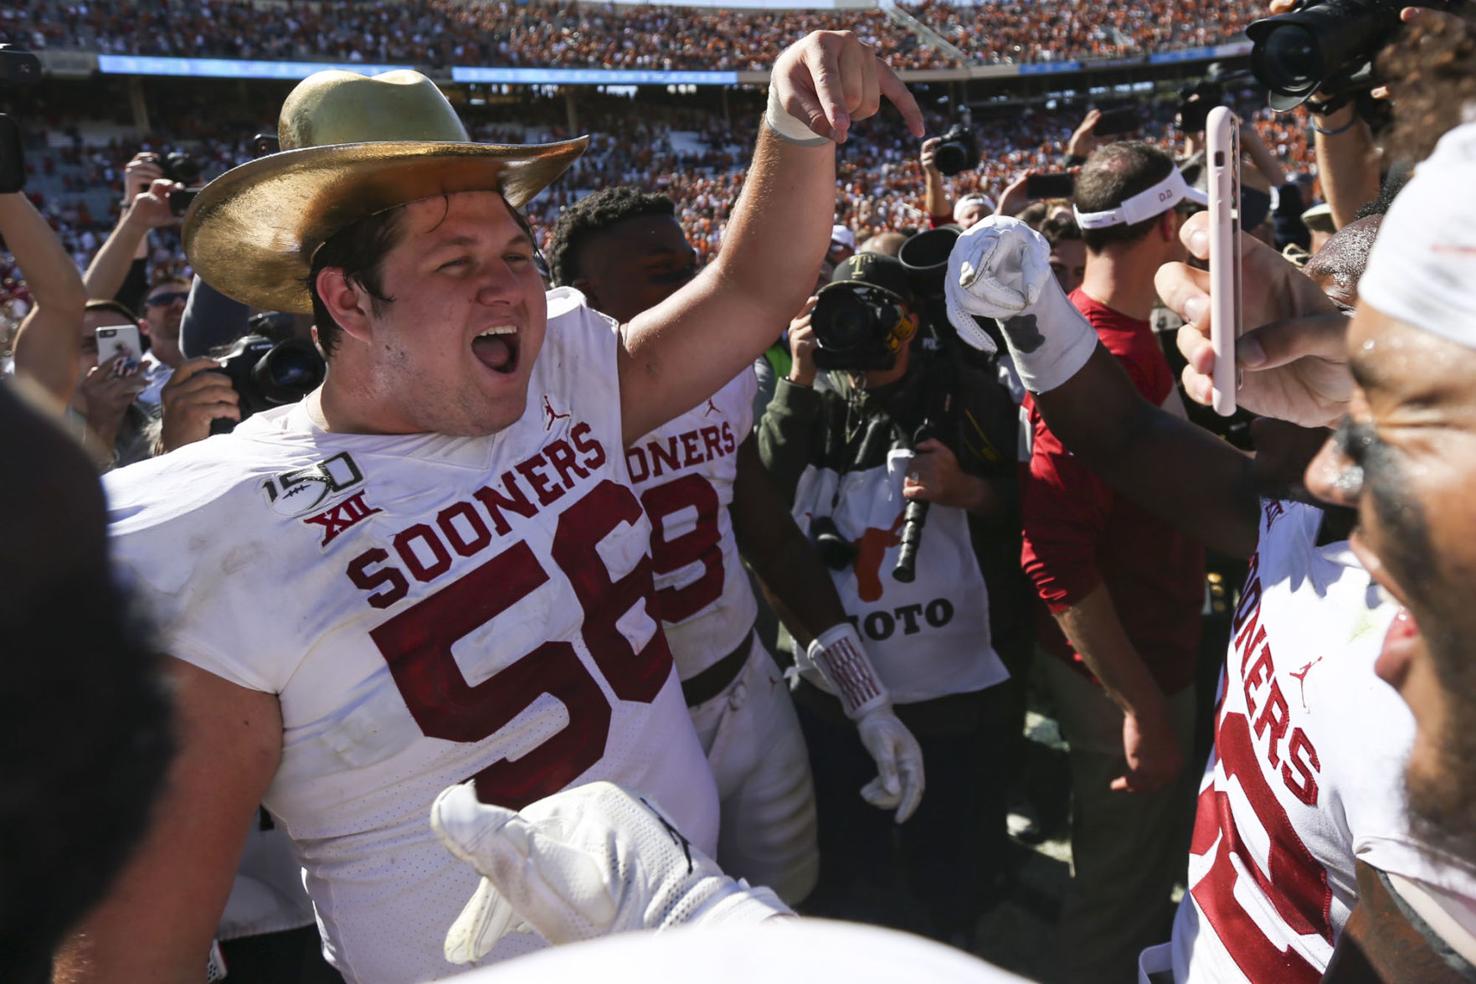 OU football Sooners celebrate after beating Texas in Red River